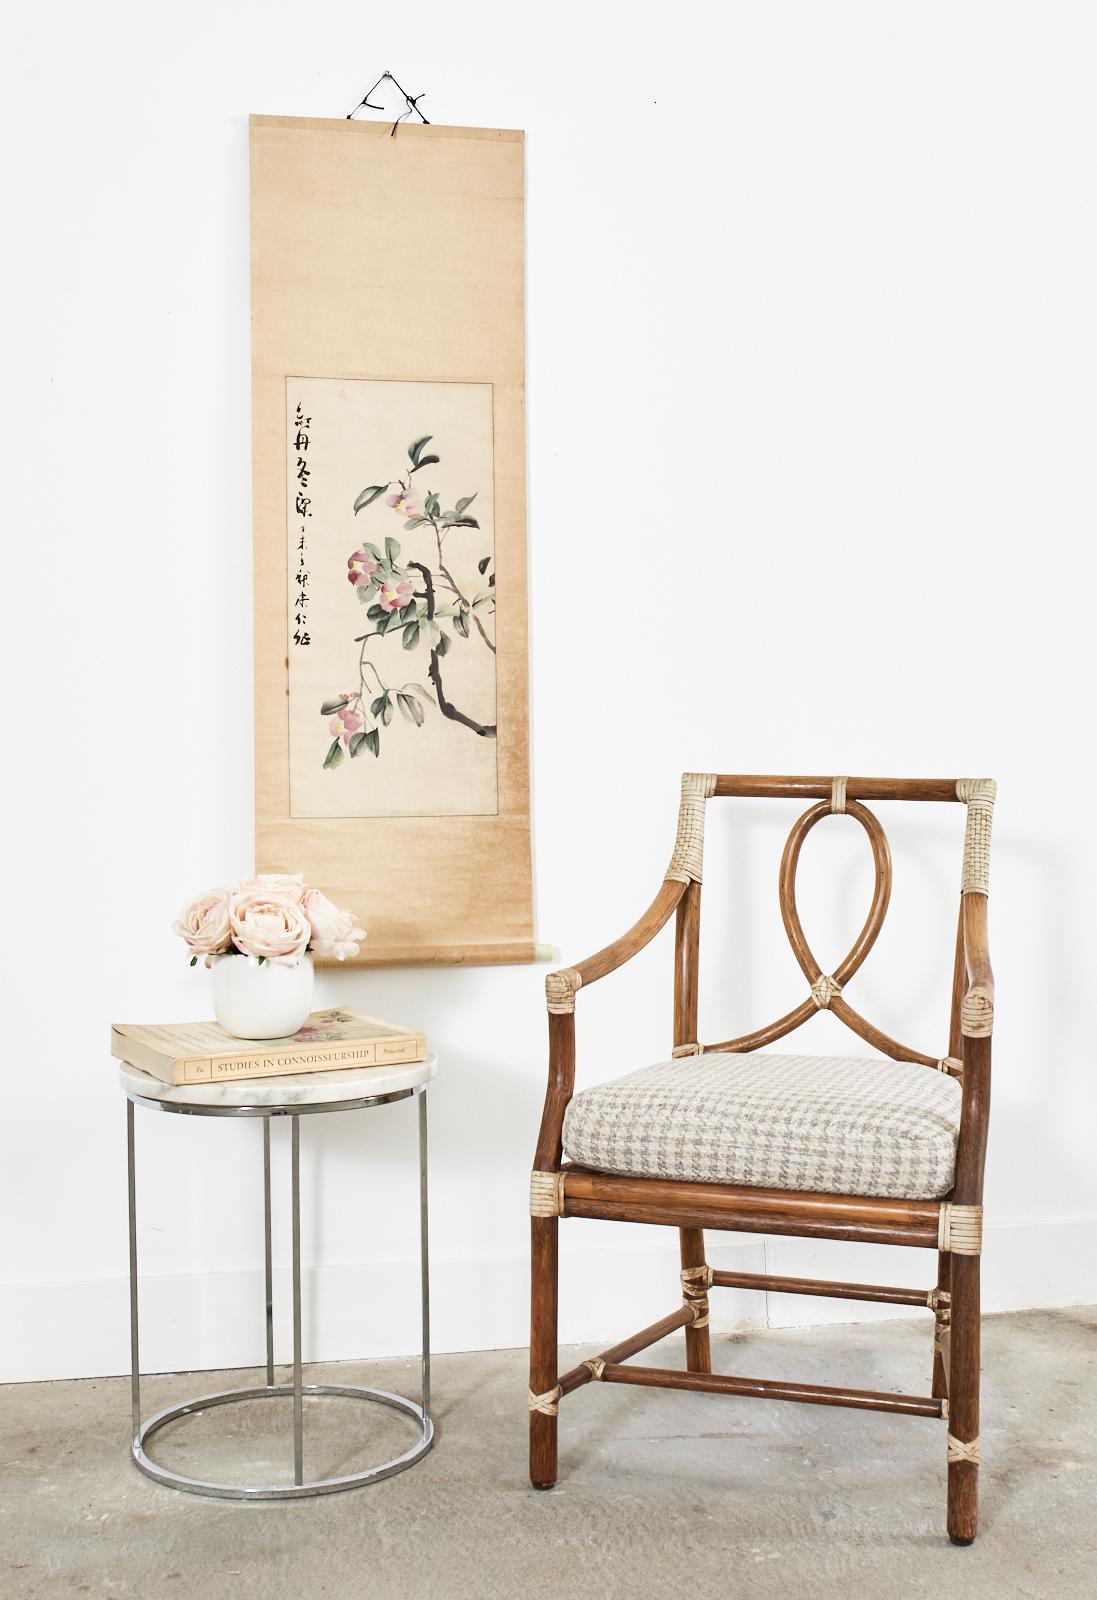 Seasonal autumn Chinese hanging scroll painting depicting colorful Camellias with a calligraphy signature and date. Crafted on hand-made mulberry paper with a silk hanger and a wooden digan round bar on the bottom having decorative faux-ivory ends.